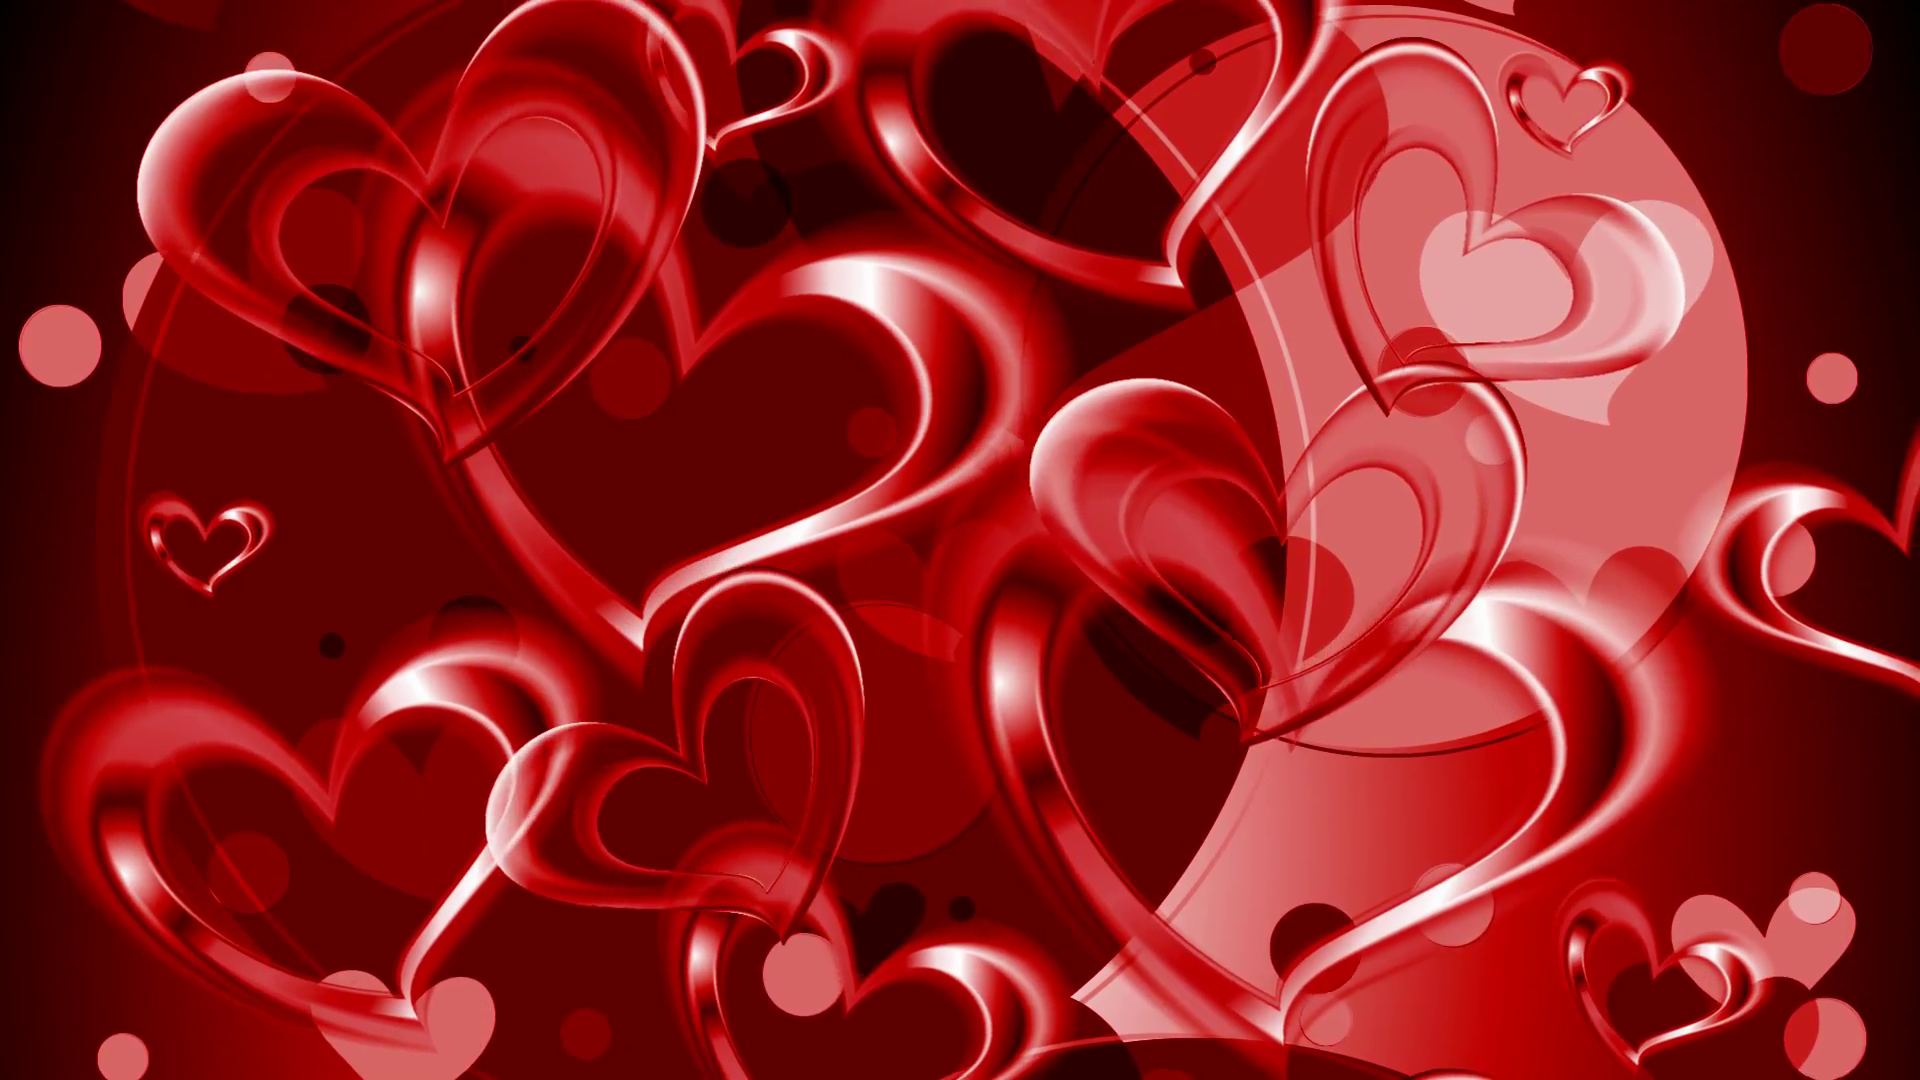 Animated Valentines Day PNG - 169251